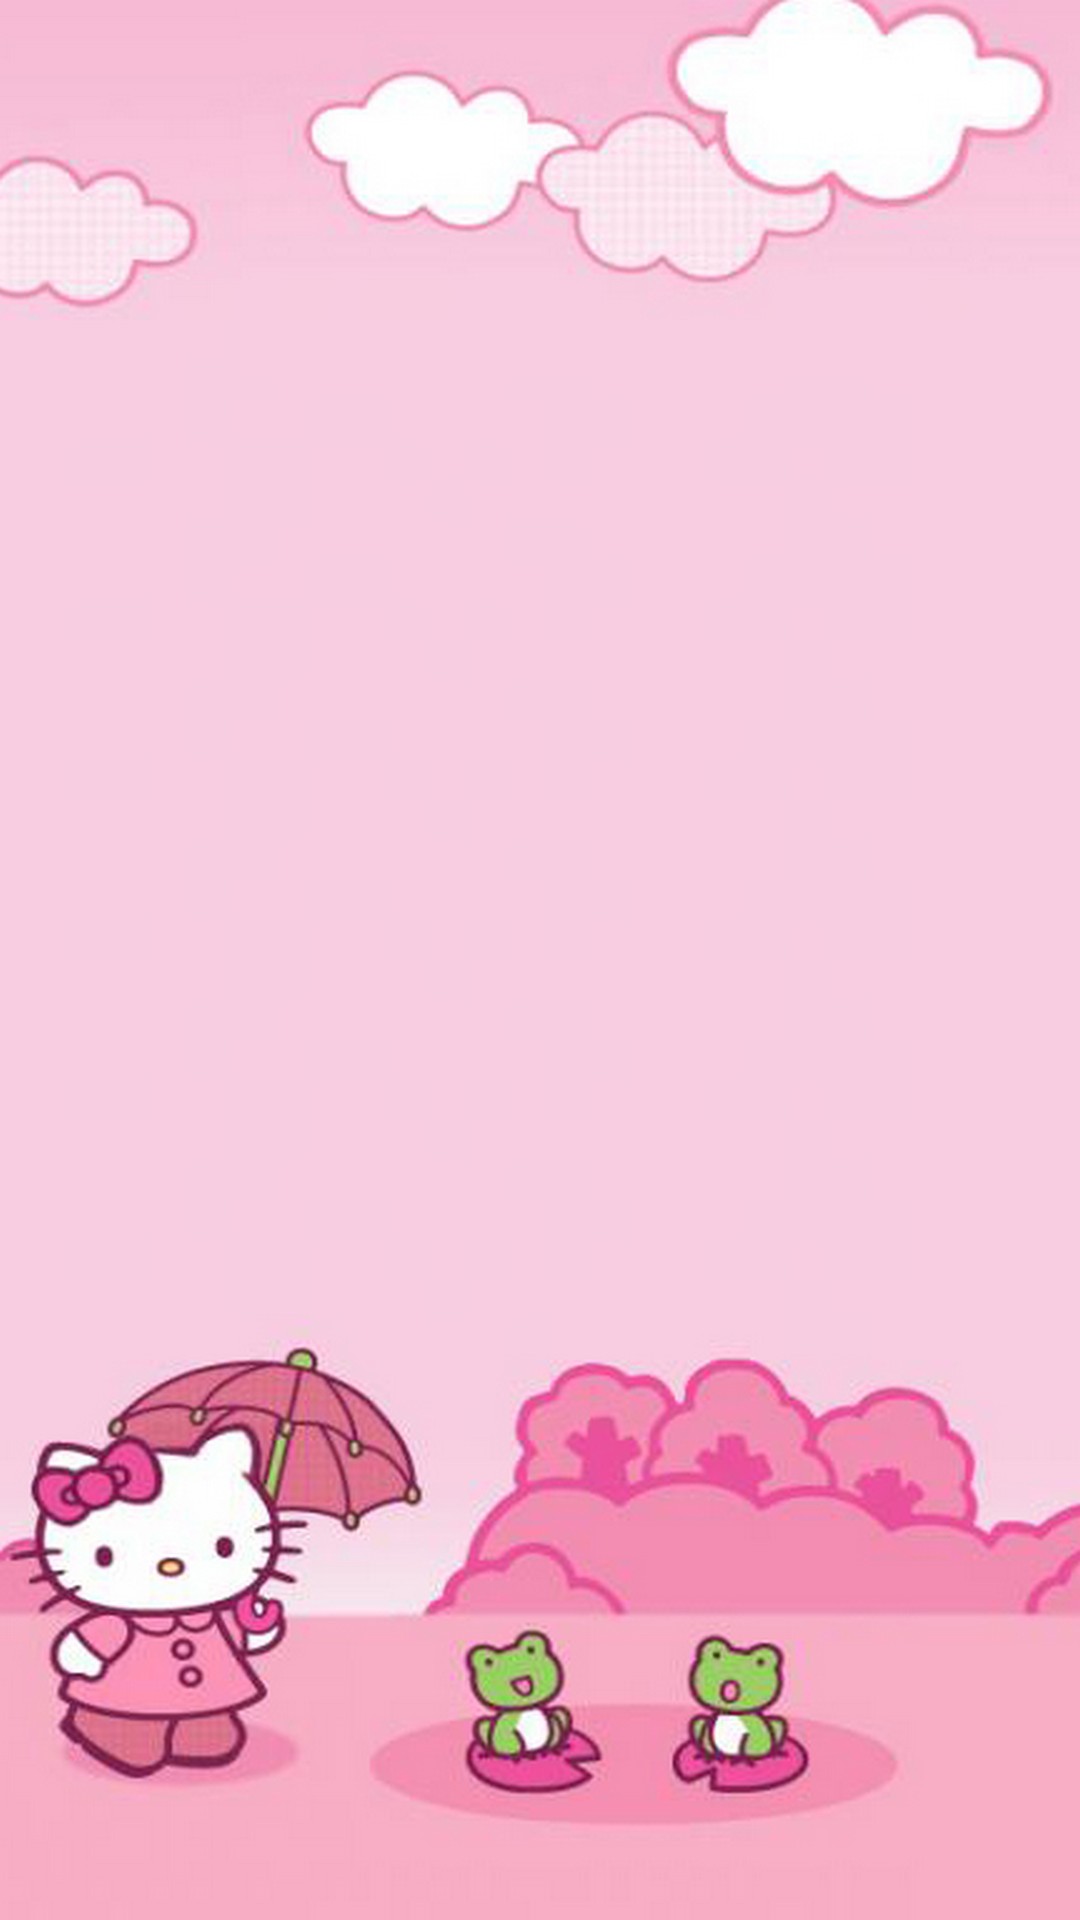 Wallpaper iPhone Sanrio Hello Kitty with image resolution 1080x1920 pixel. You can make this wallpaper for your iPhone 5, 6, 7, 8, X backgrounds, Mobile Screensaver, or iPad Lock Screen